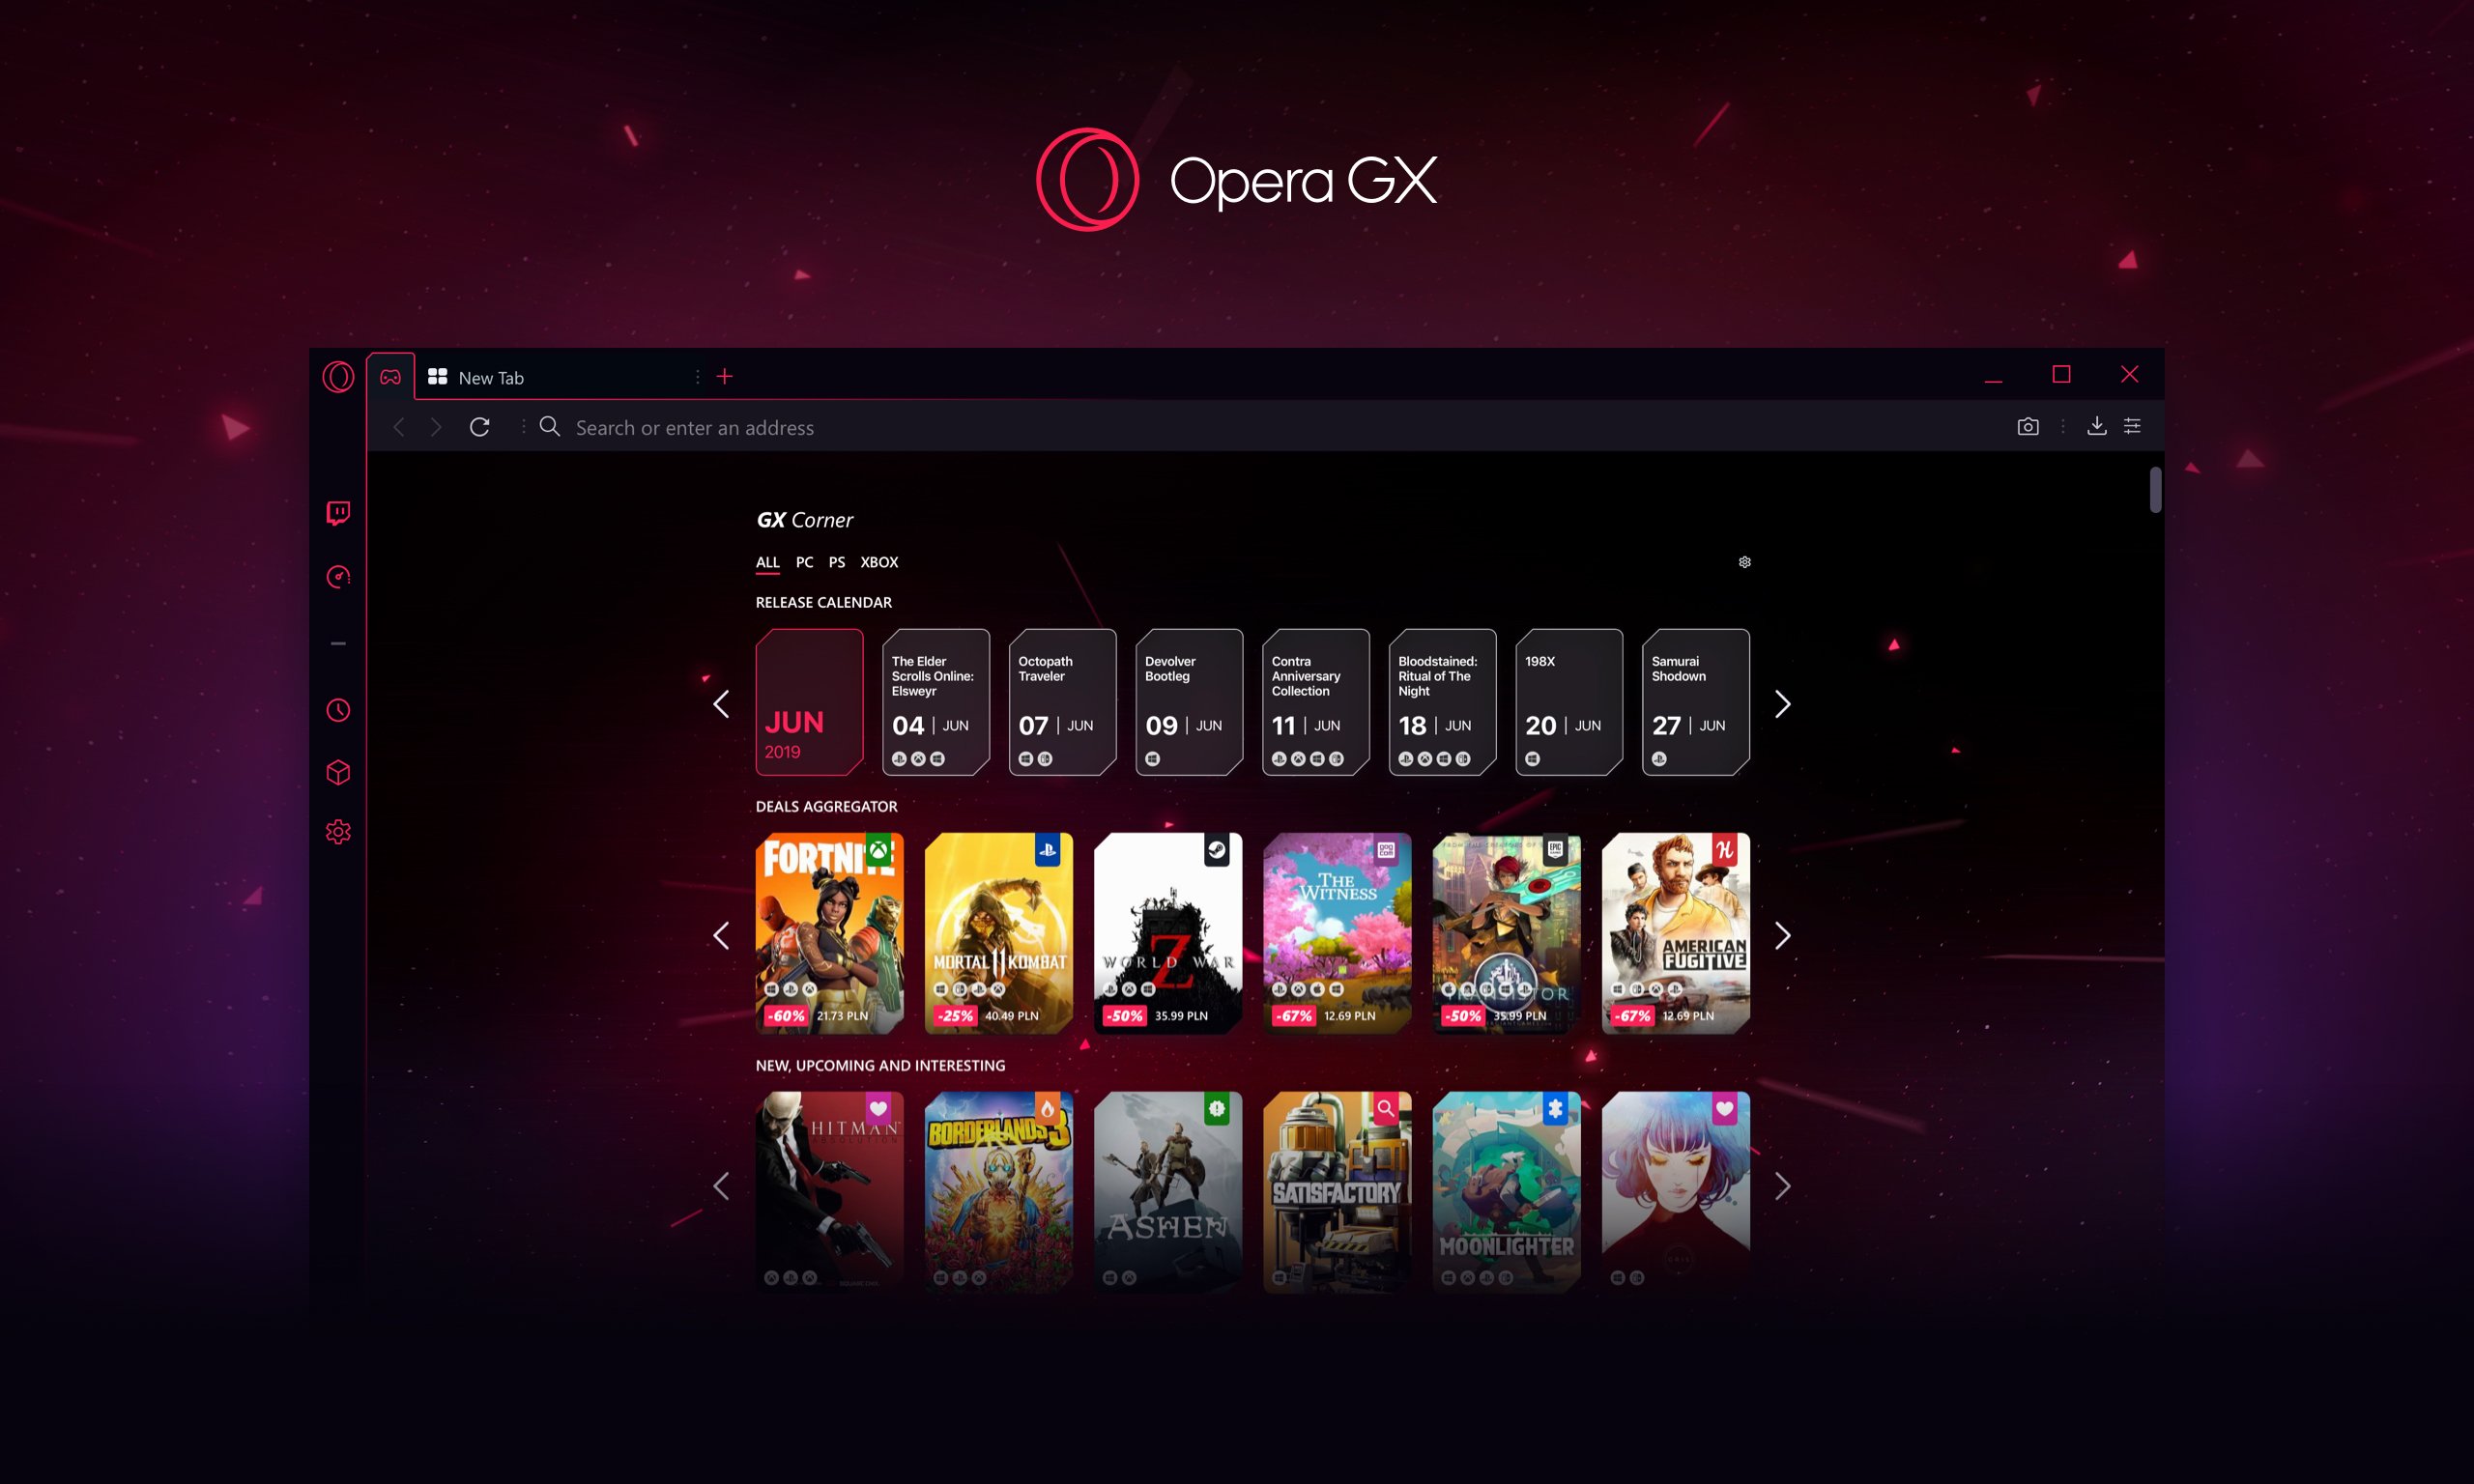 Opera GX – the world's only browser for gamers – debuts on the